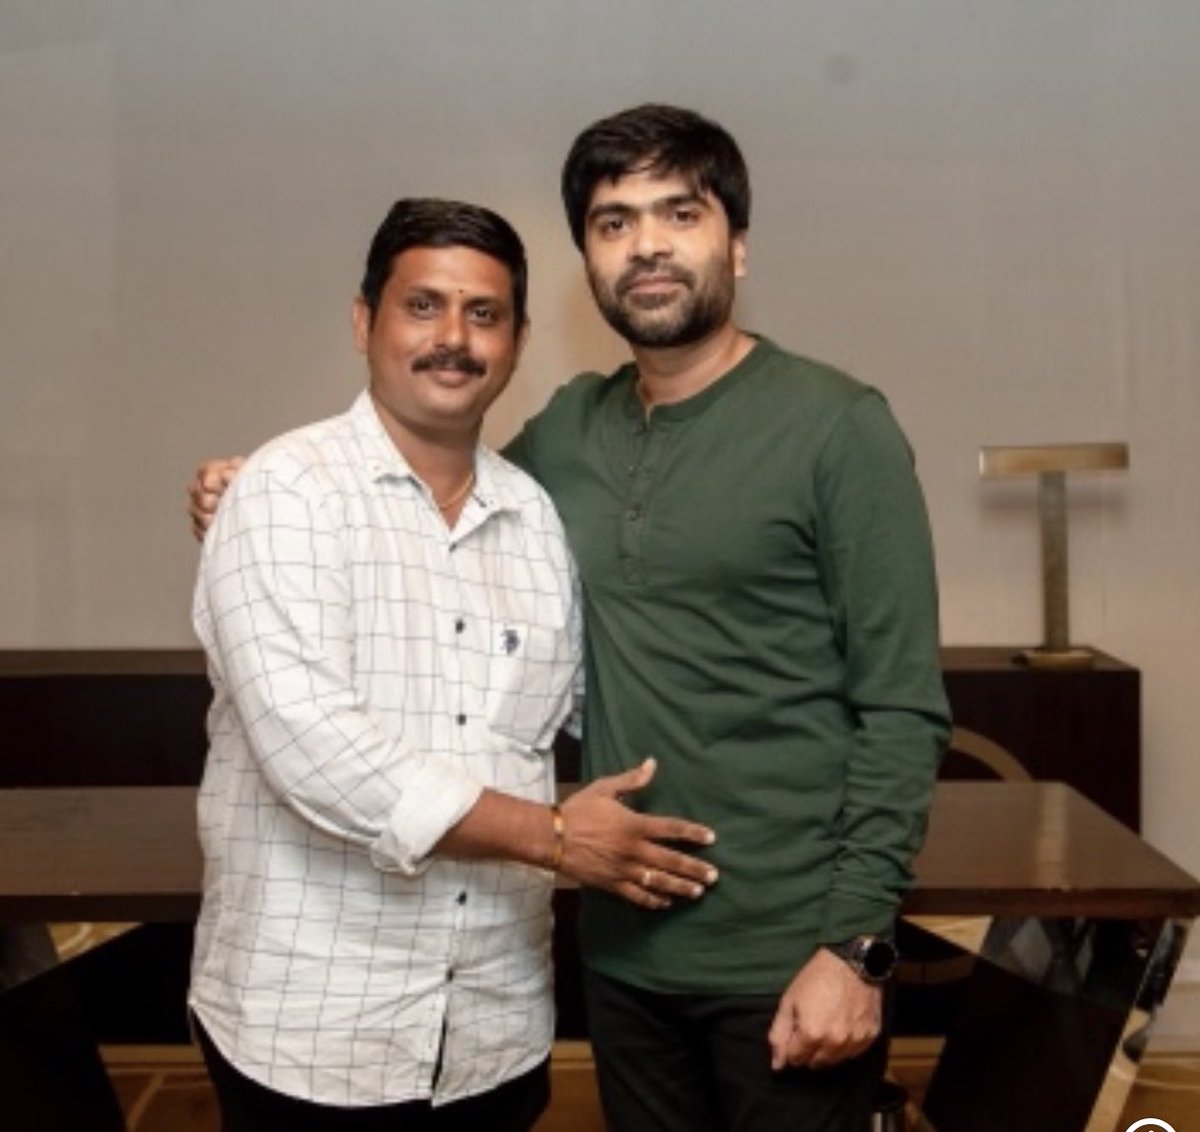 We are always so proud of you Anna today is expception           it’s Dr actually congratulations on your Doctorate Anna            Your are been an inspiration     #str #DrSilambarasanTR #Simbu #Atman #teamaim